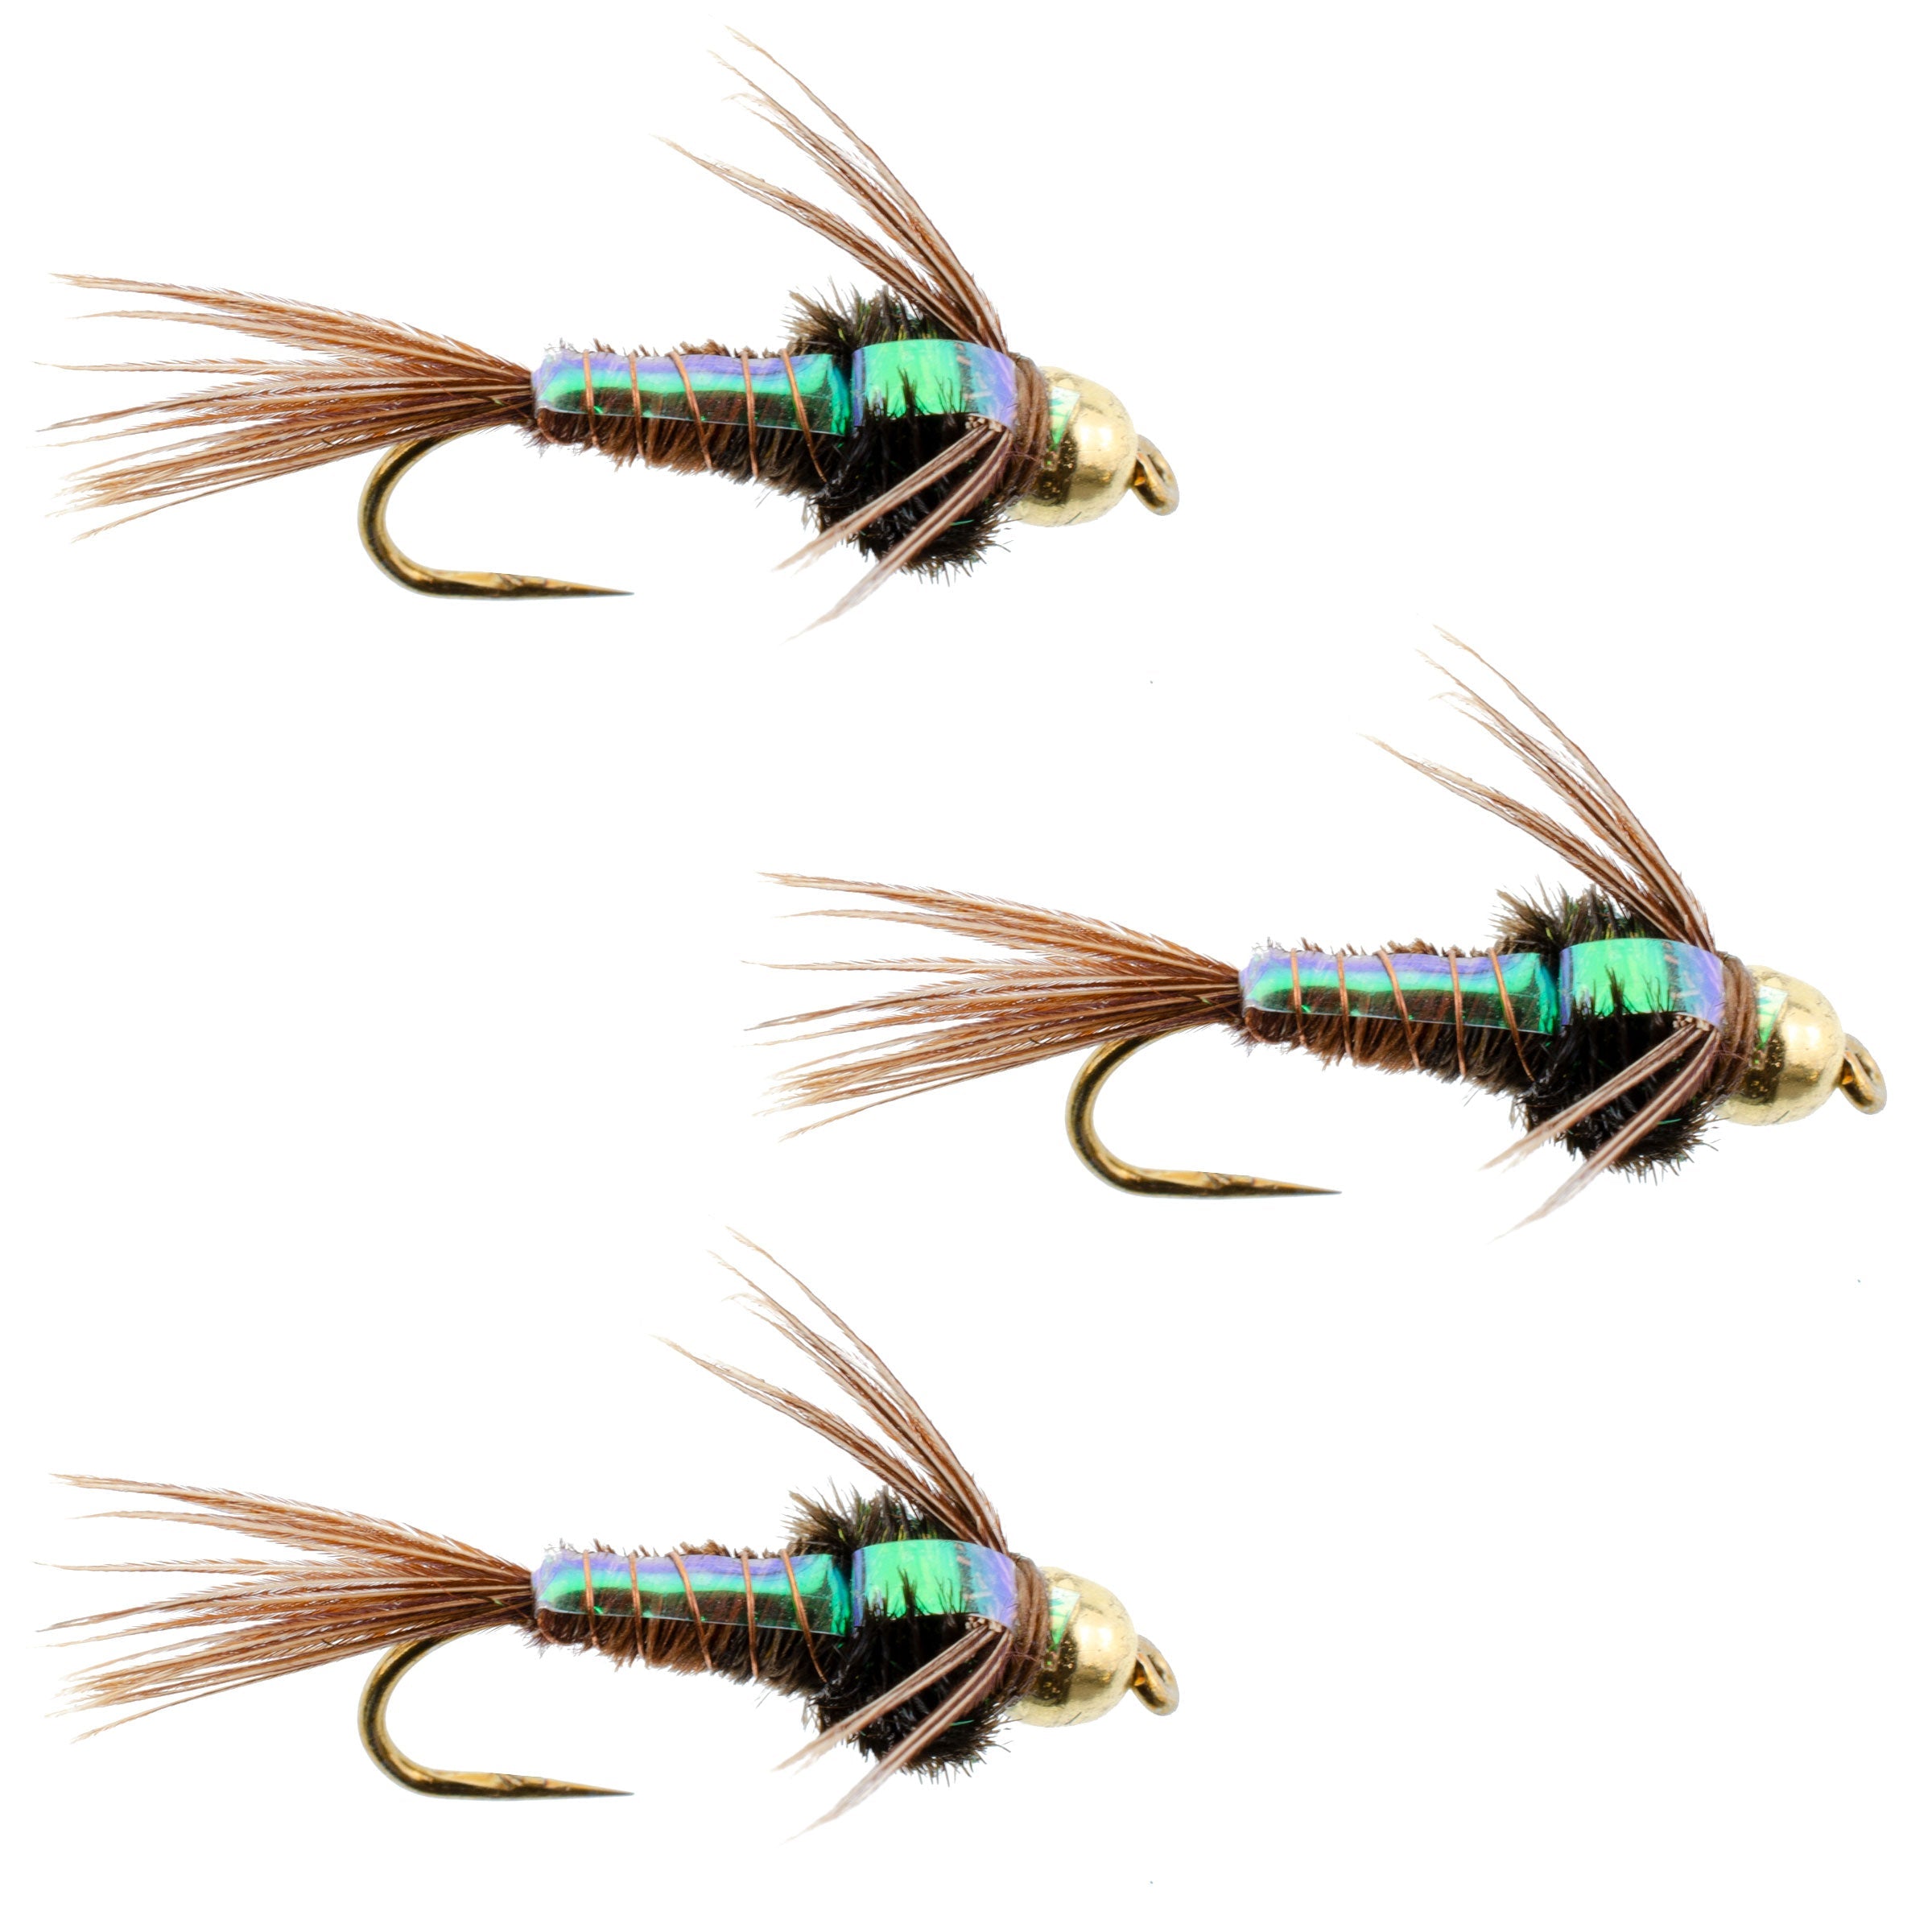 3 Pack Barbless Bead Head Flashback Pheasant Tail Nymph Flies Hook Size 16